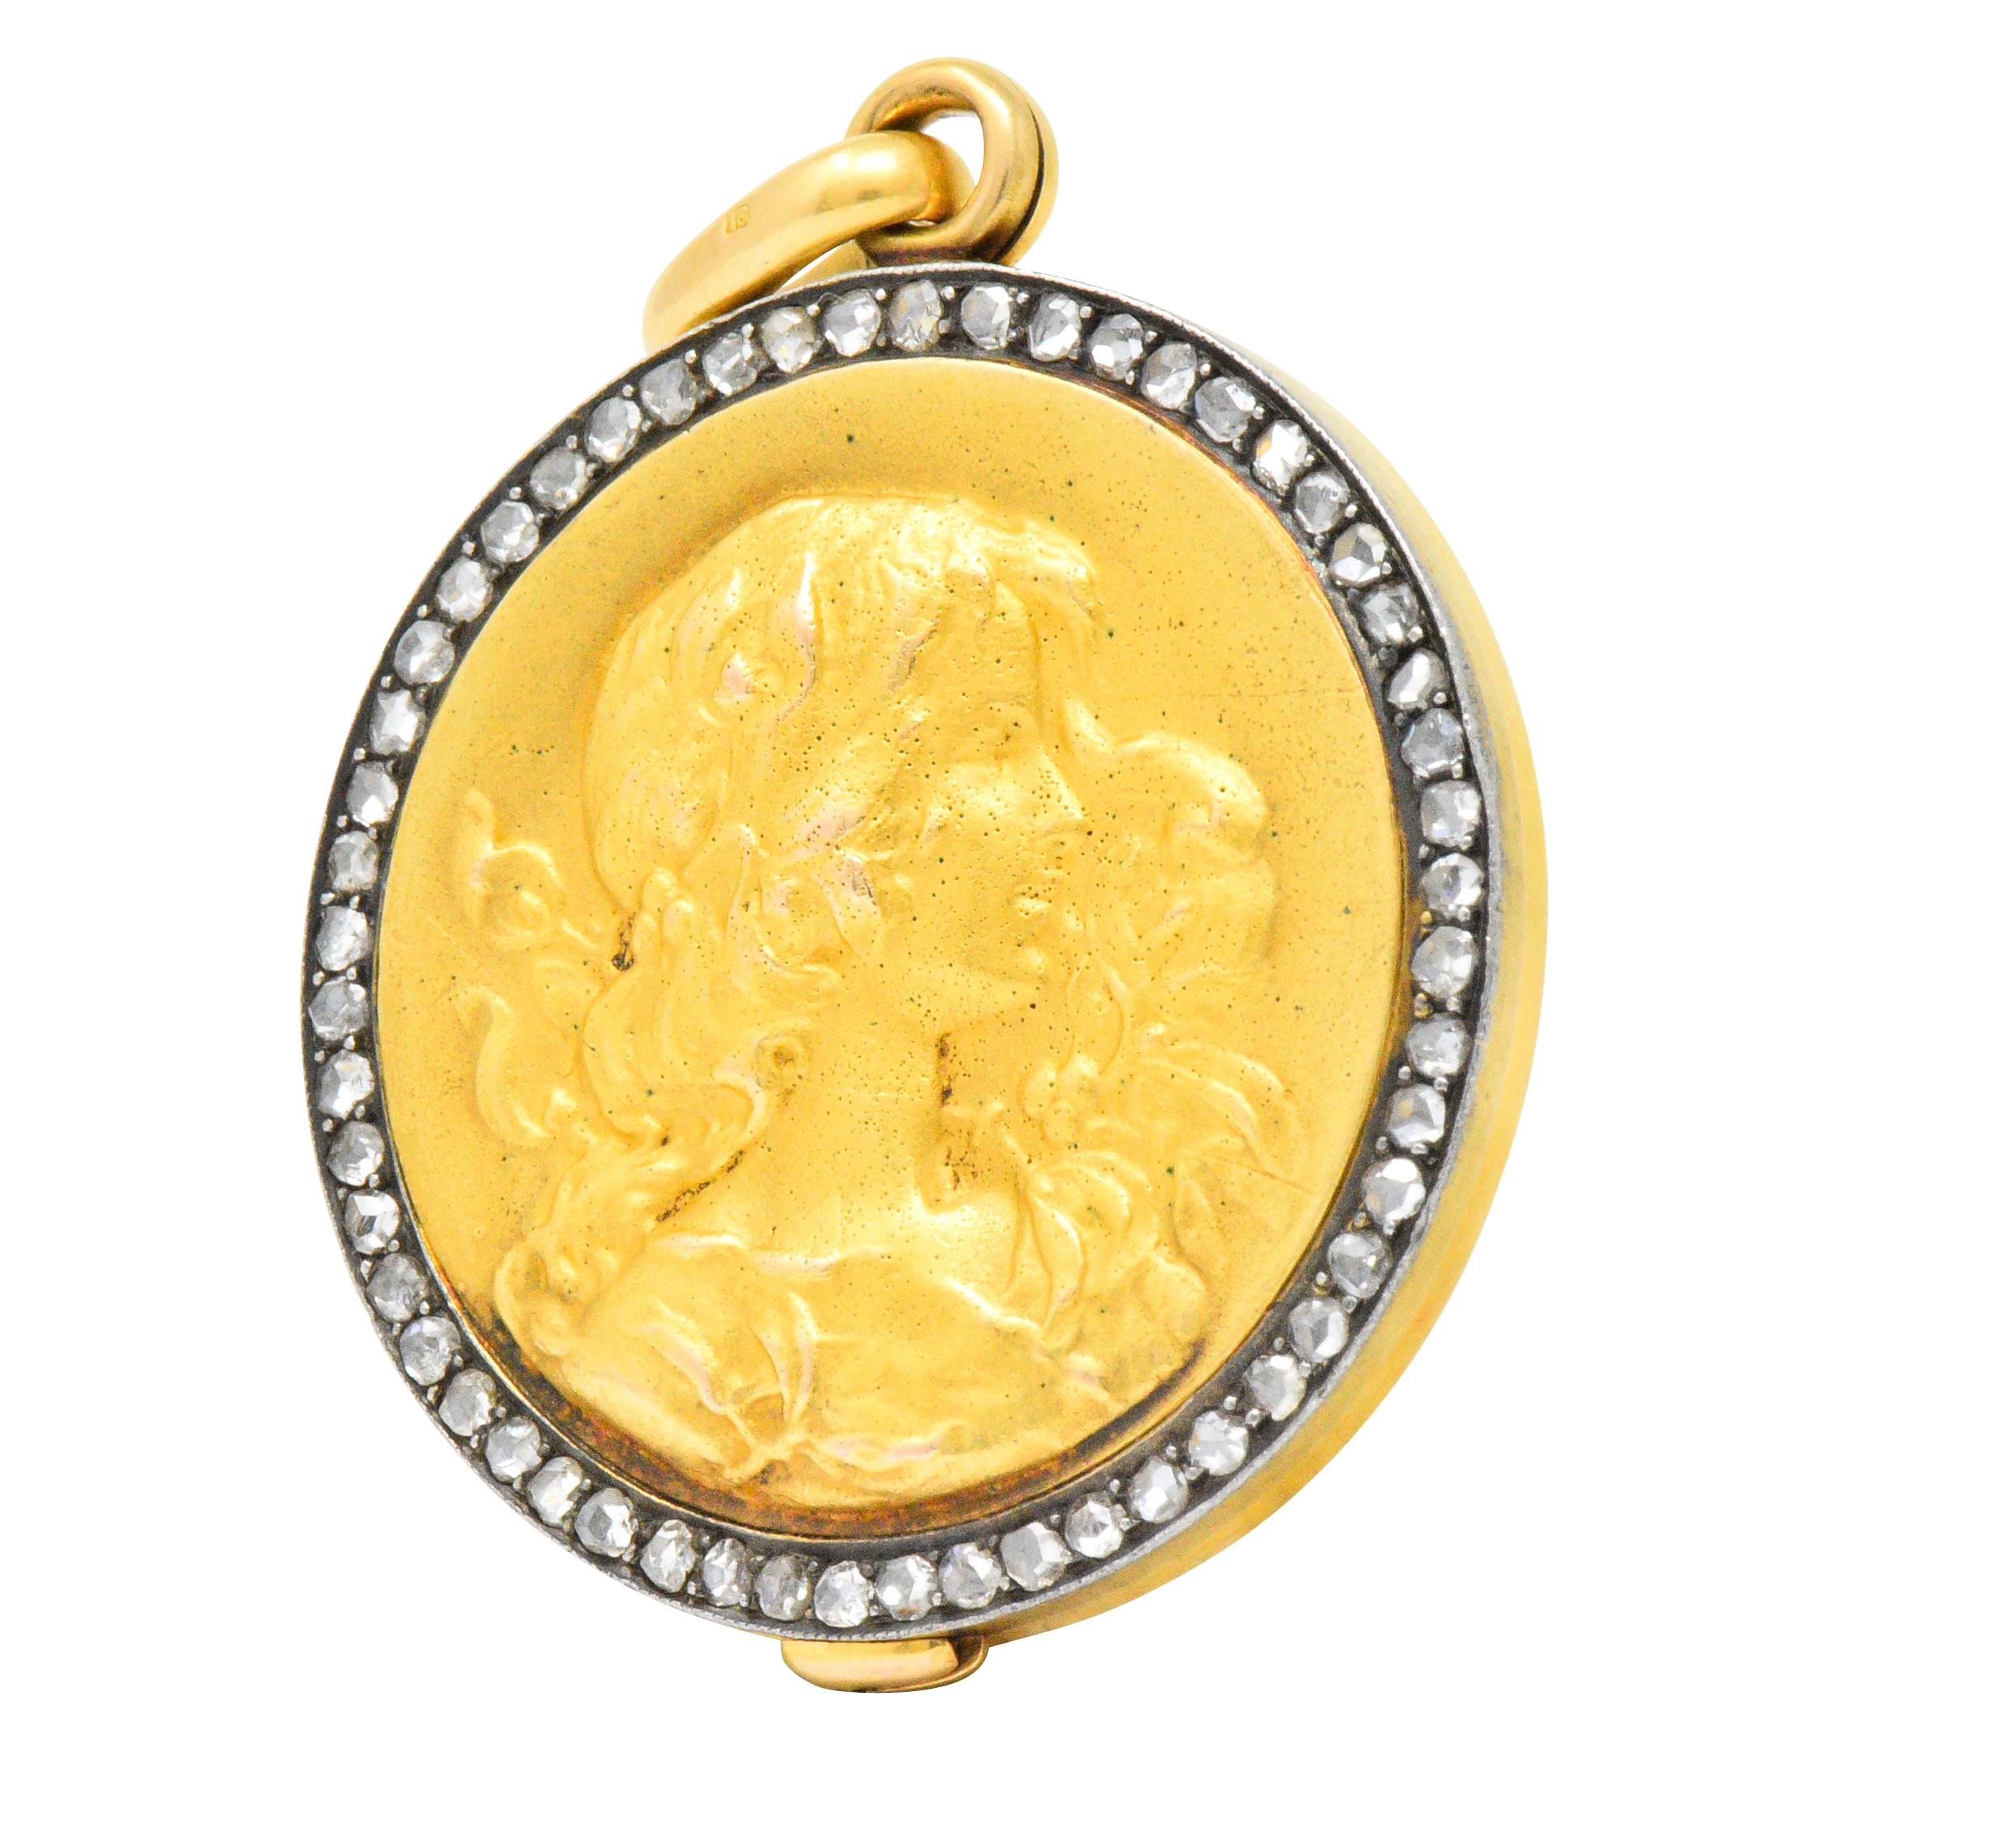 Centering repoussé matte gold profile of a lady 

With a rose cut diamonds surround

Beautifully detailed with flowing hair and flowers

Slide style, revealing two circular recessed frames, glass deficient

Inscribed on verso with 